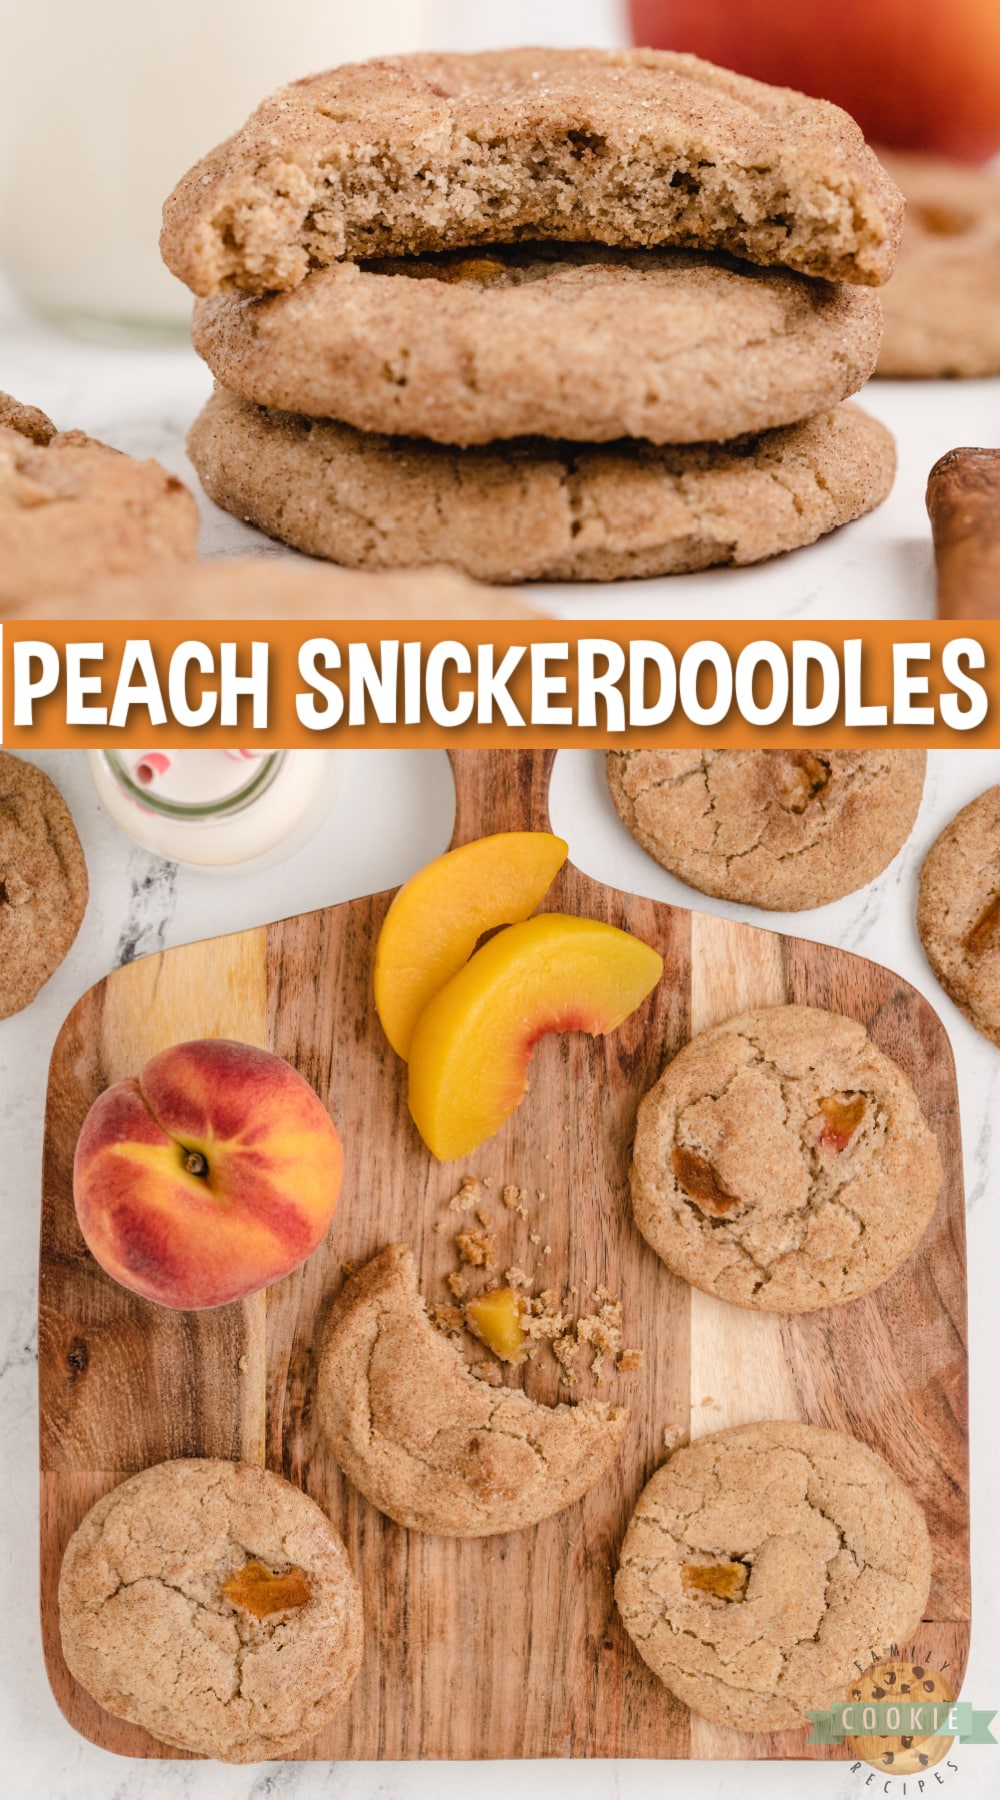 Peach Snickerdoodle Cookies are soft, chewy, delicious and the addition of fresh peaches makes these cinnamon sugar cookies even better!